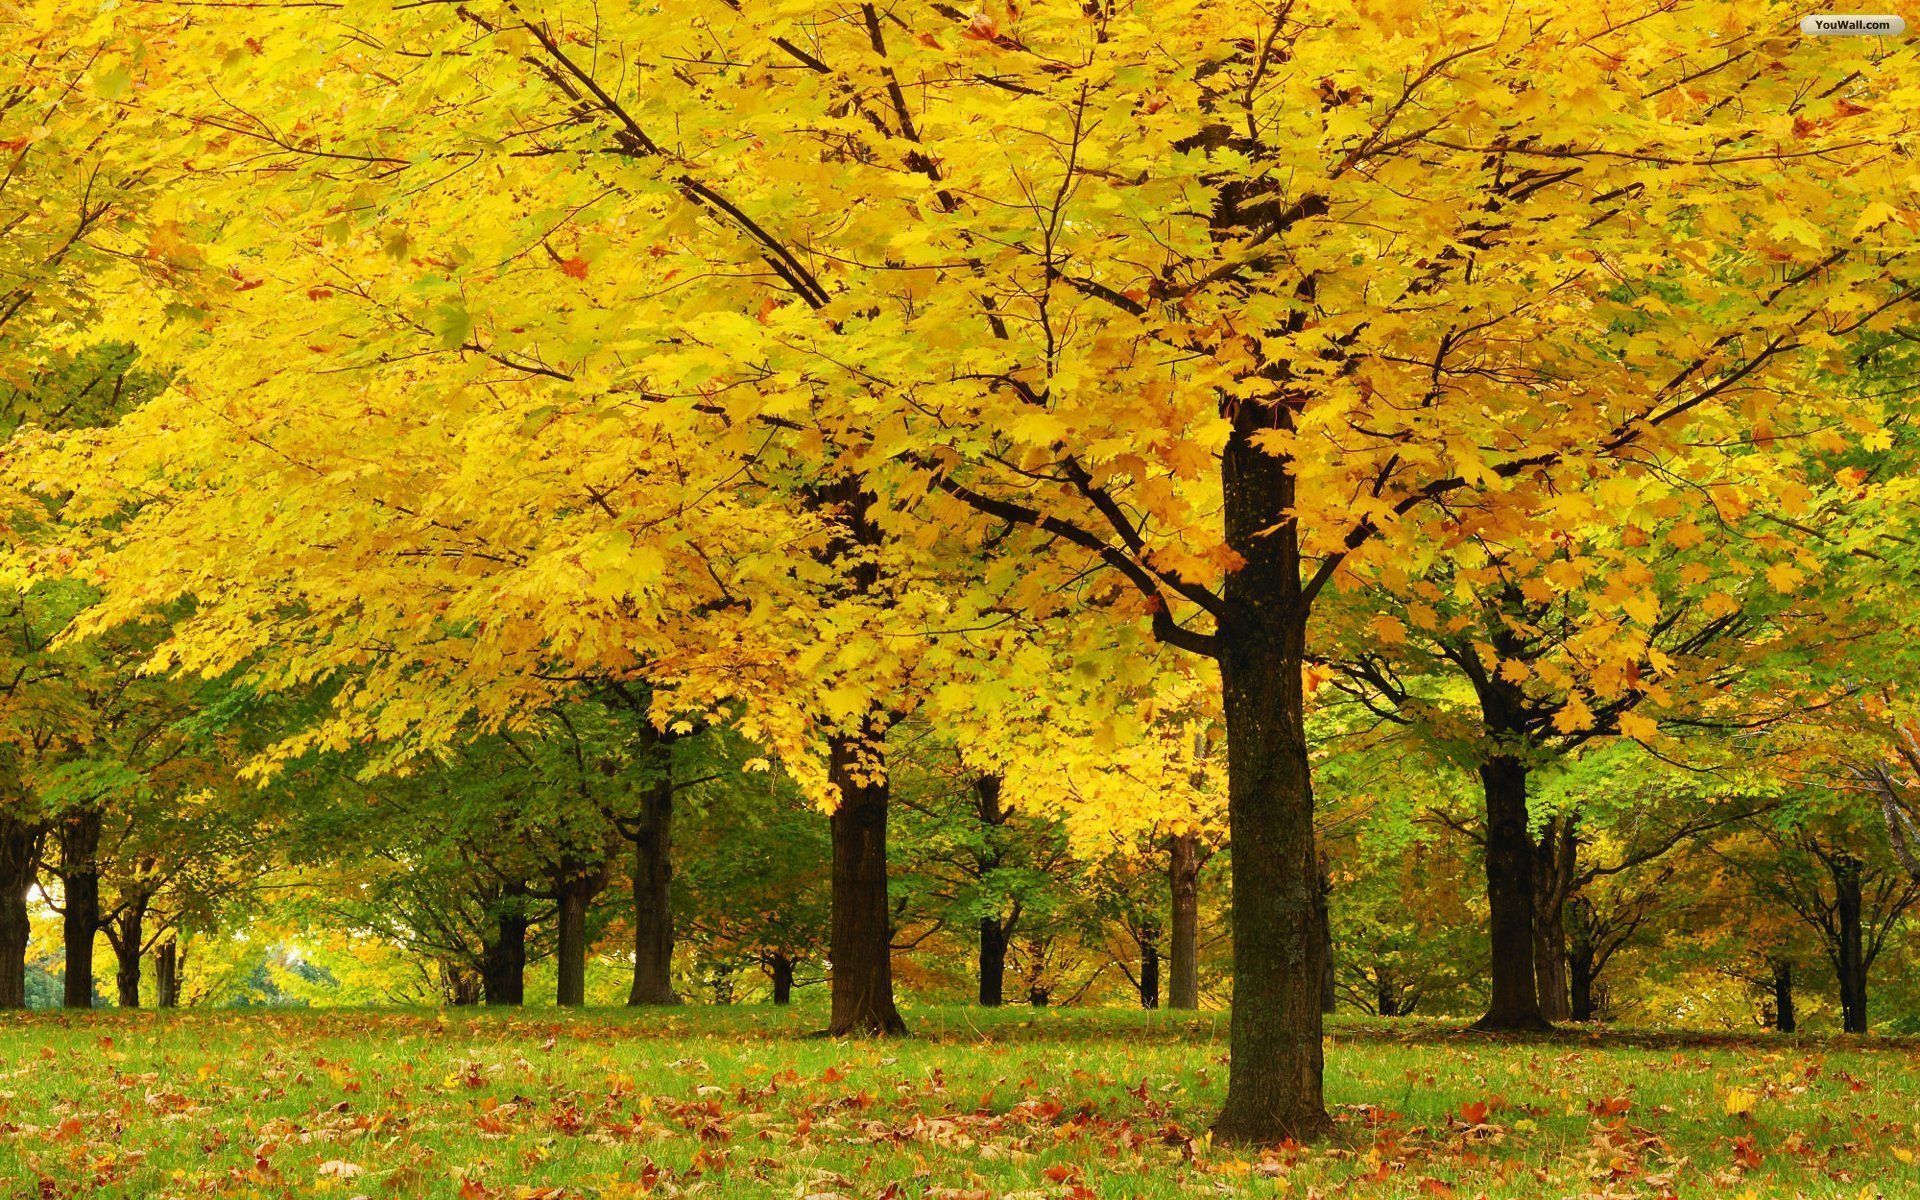 HD Quality Awesome Trees Wallpaper for Desktop 3 - SiWallpaper 11642